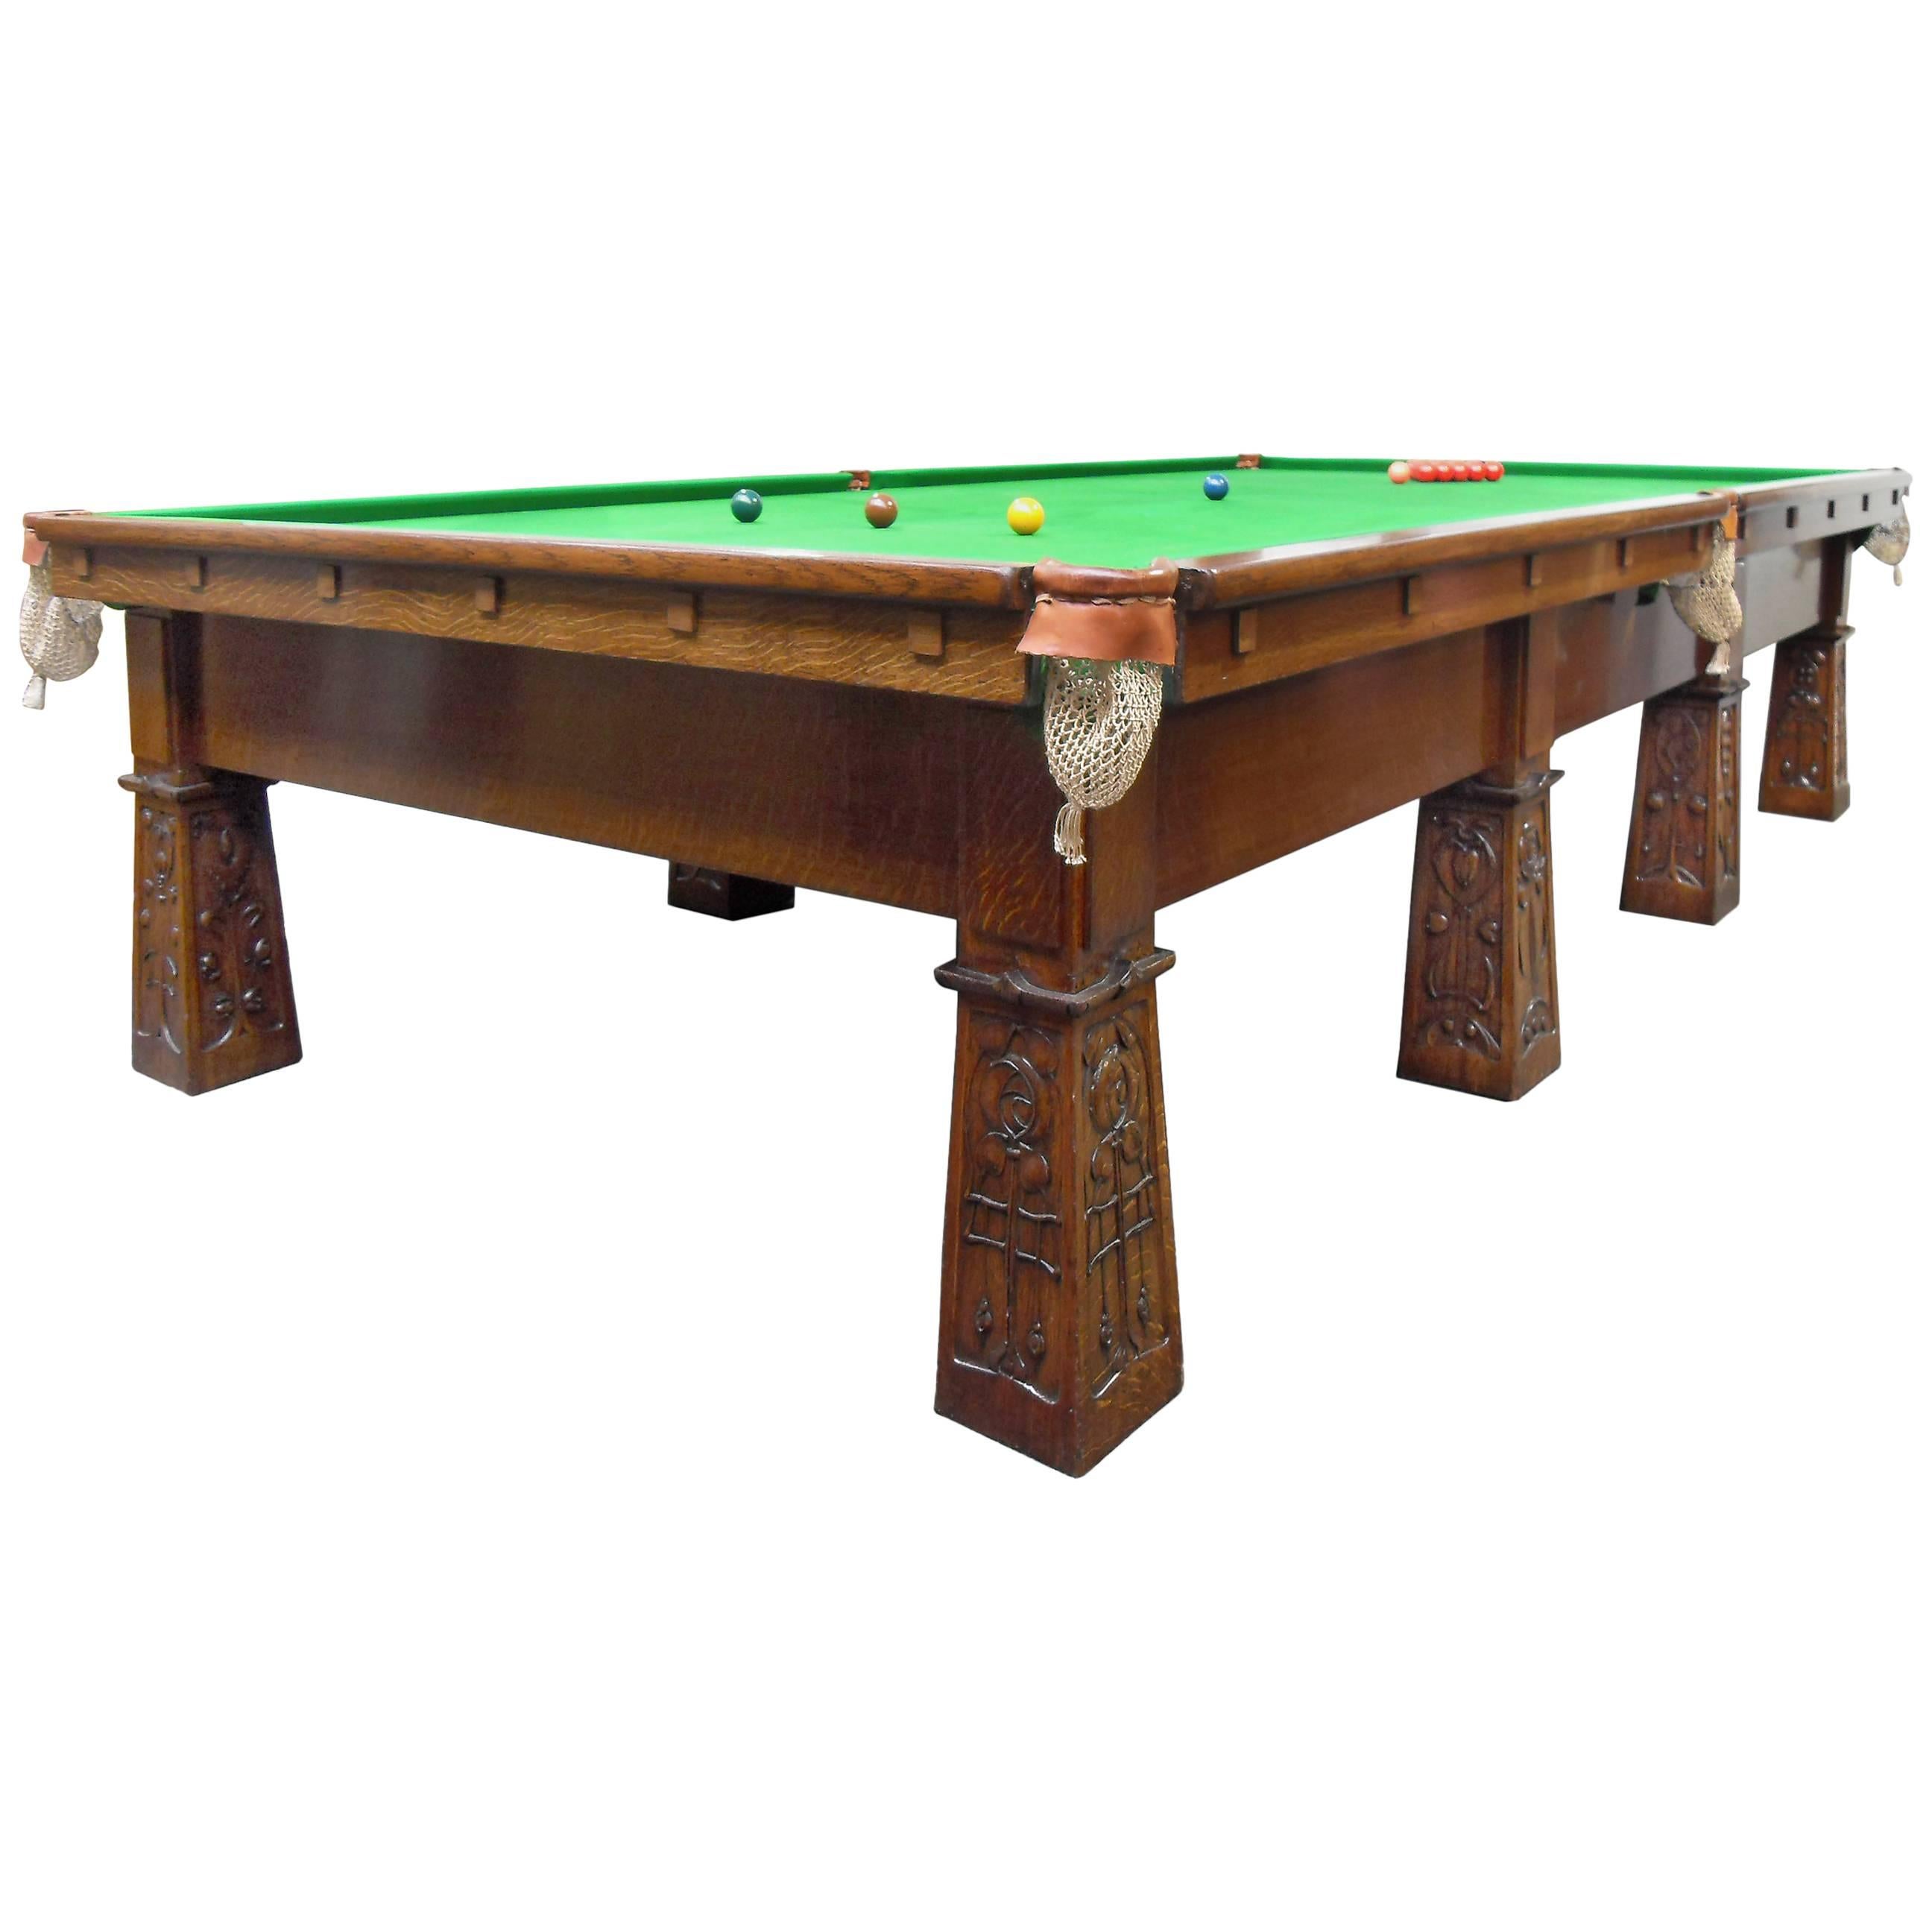 Rare Arts and Crafts oak billiard snooker table c1905; Wylie & Lochhead Glasgow For Sale